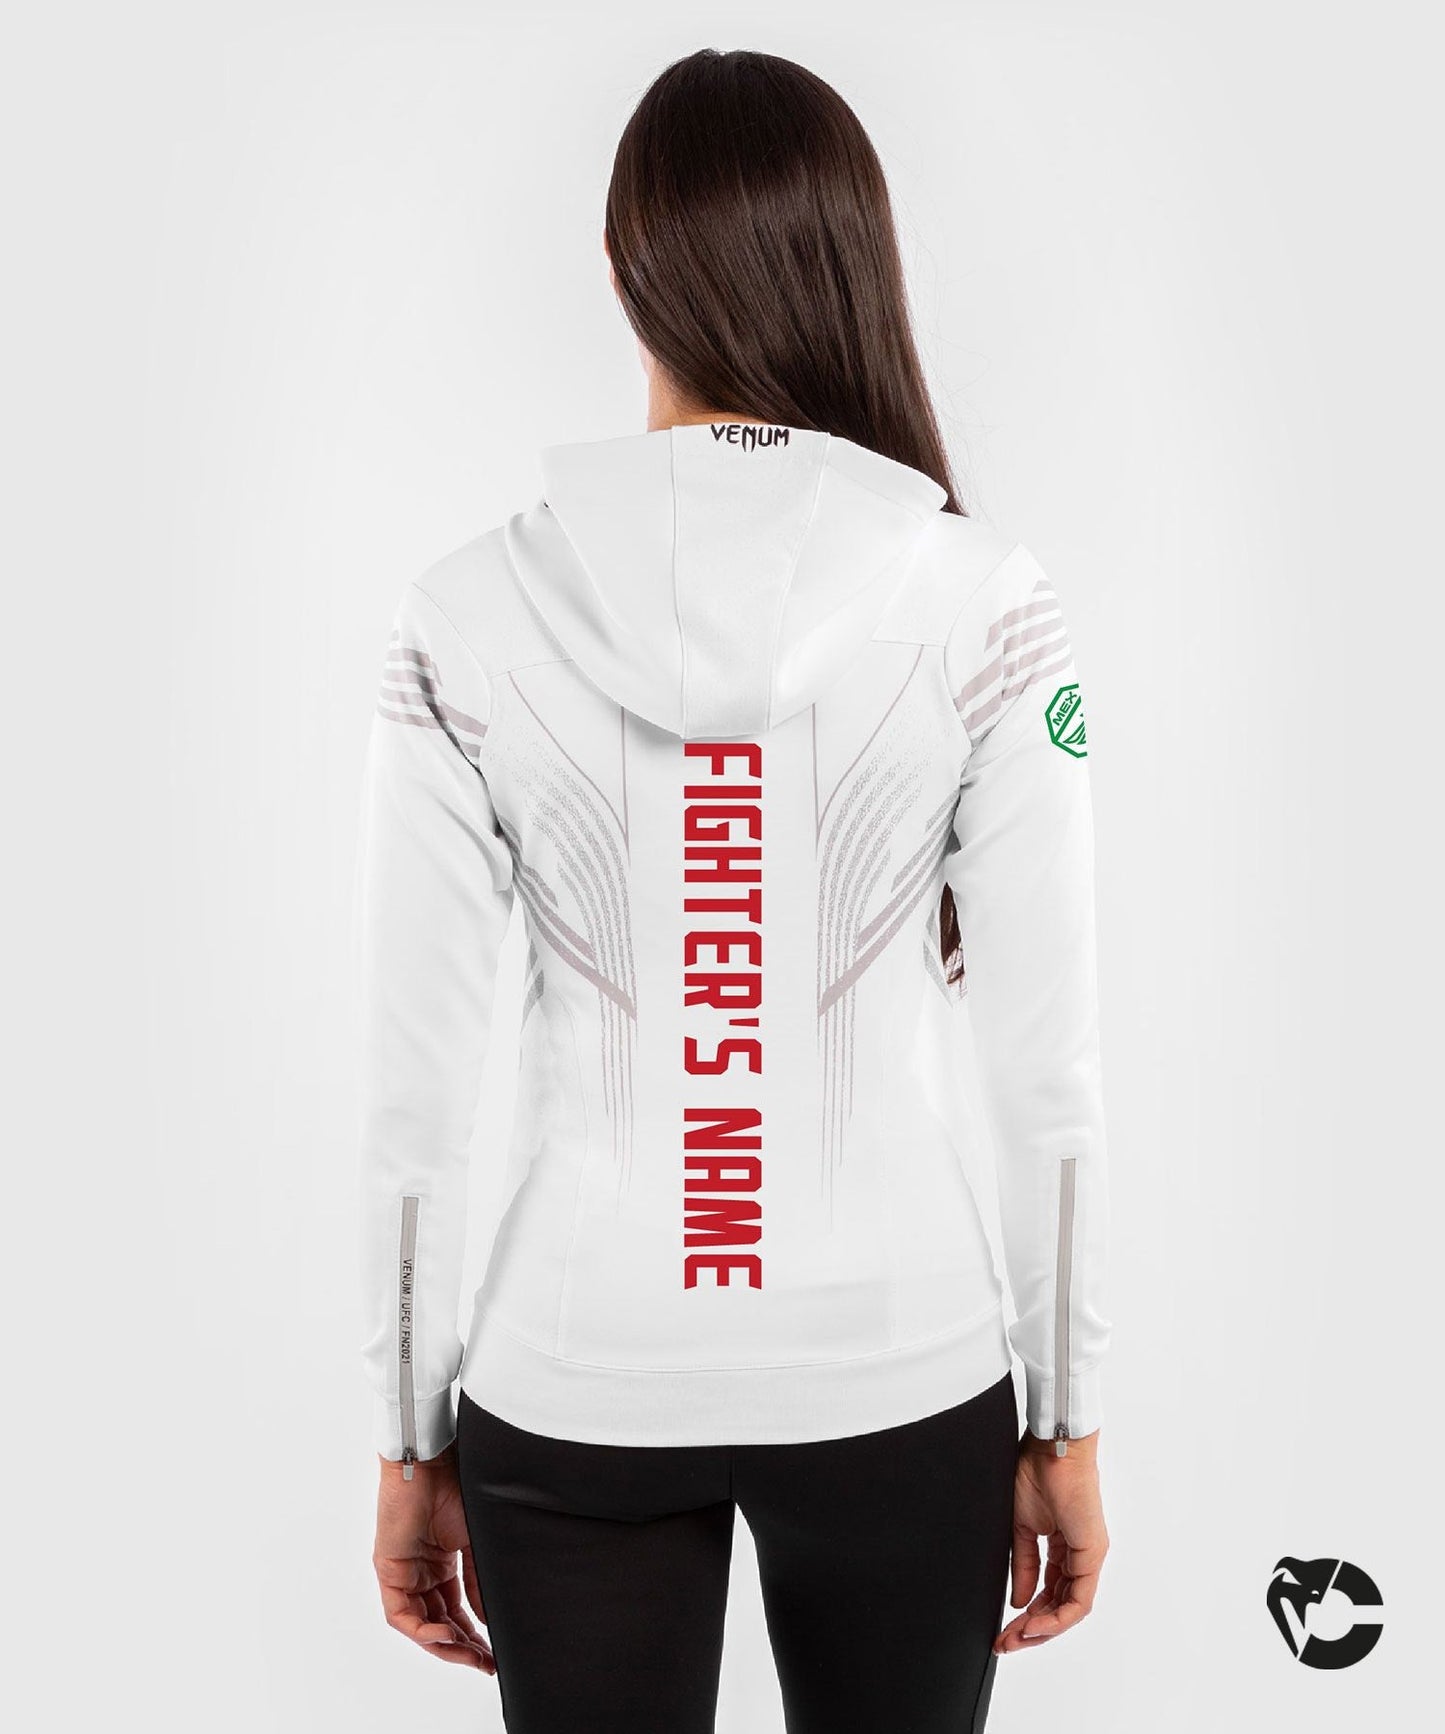 UFC Venum Fighters Authentic Fight Night Women's Walkout Hoodie - White